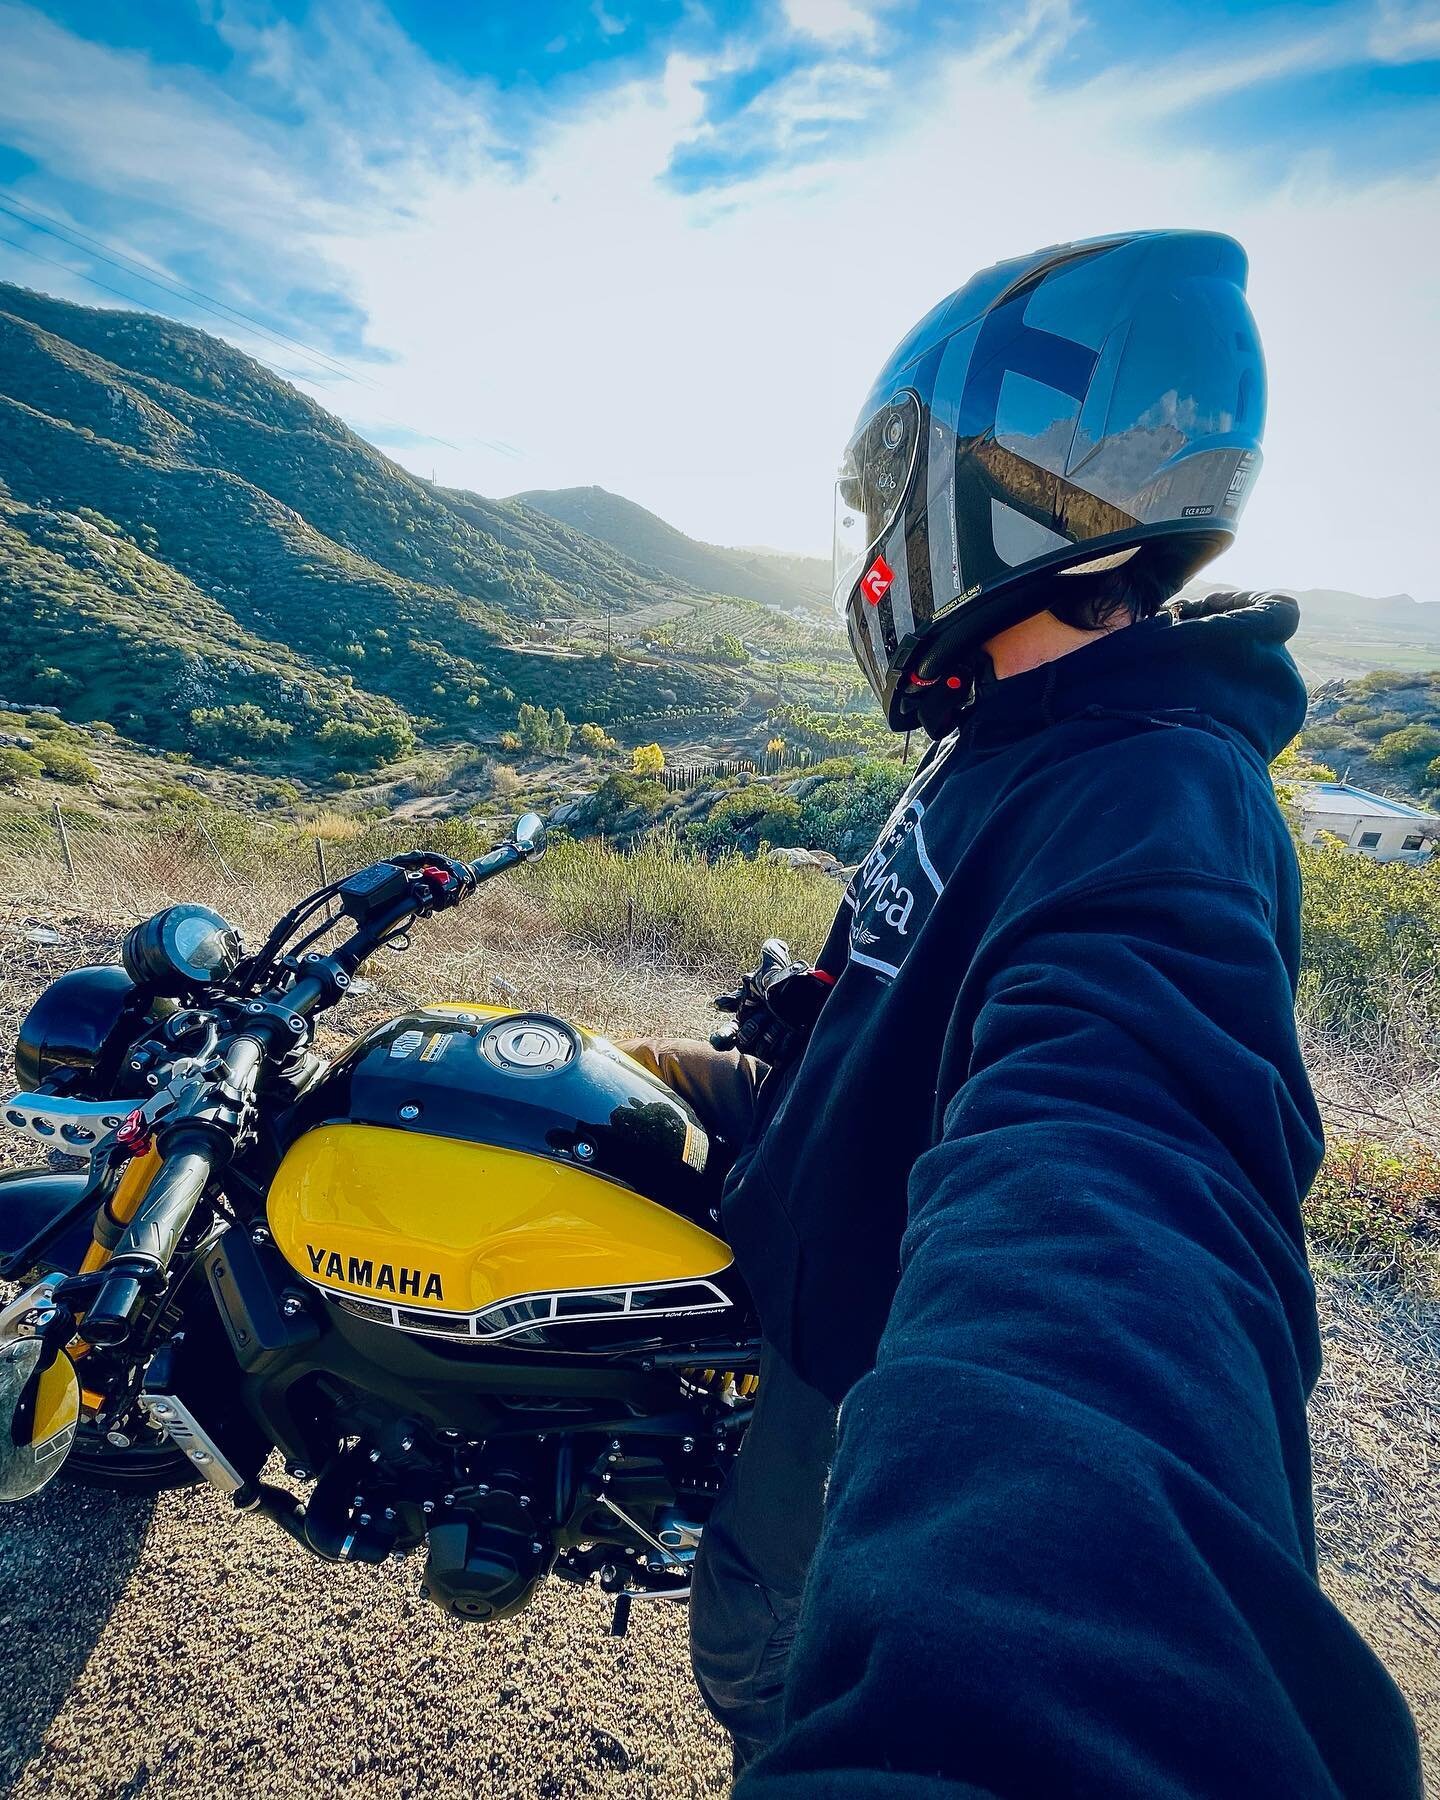 &ldquo;Life Moves Pretty Fast. If You Don&rsquo;t Stop And Look Around Once In A While, You Could Miss It.&rdquo; -FB
&bull;
Happy New Year! 
&bull;

#getoutandride #adventure #california #freedoom #motolife #streetfighter #streetbike #caferacer #mot